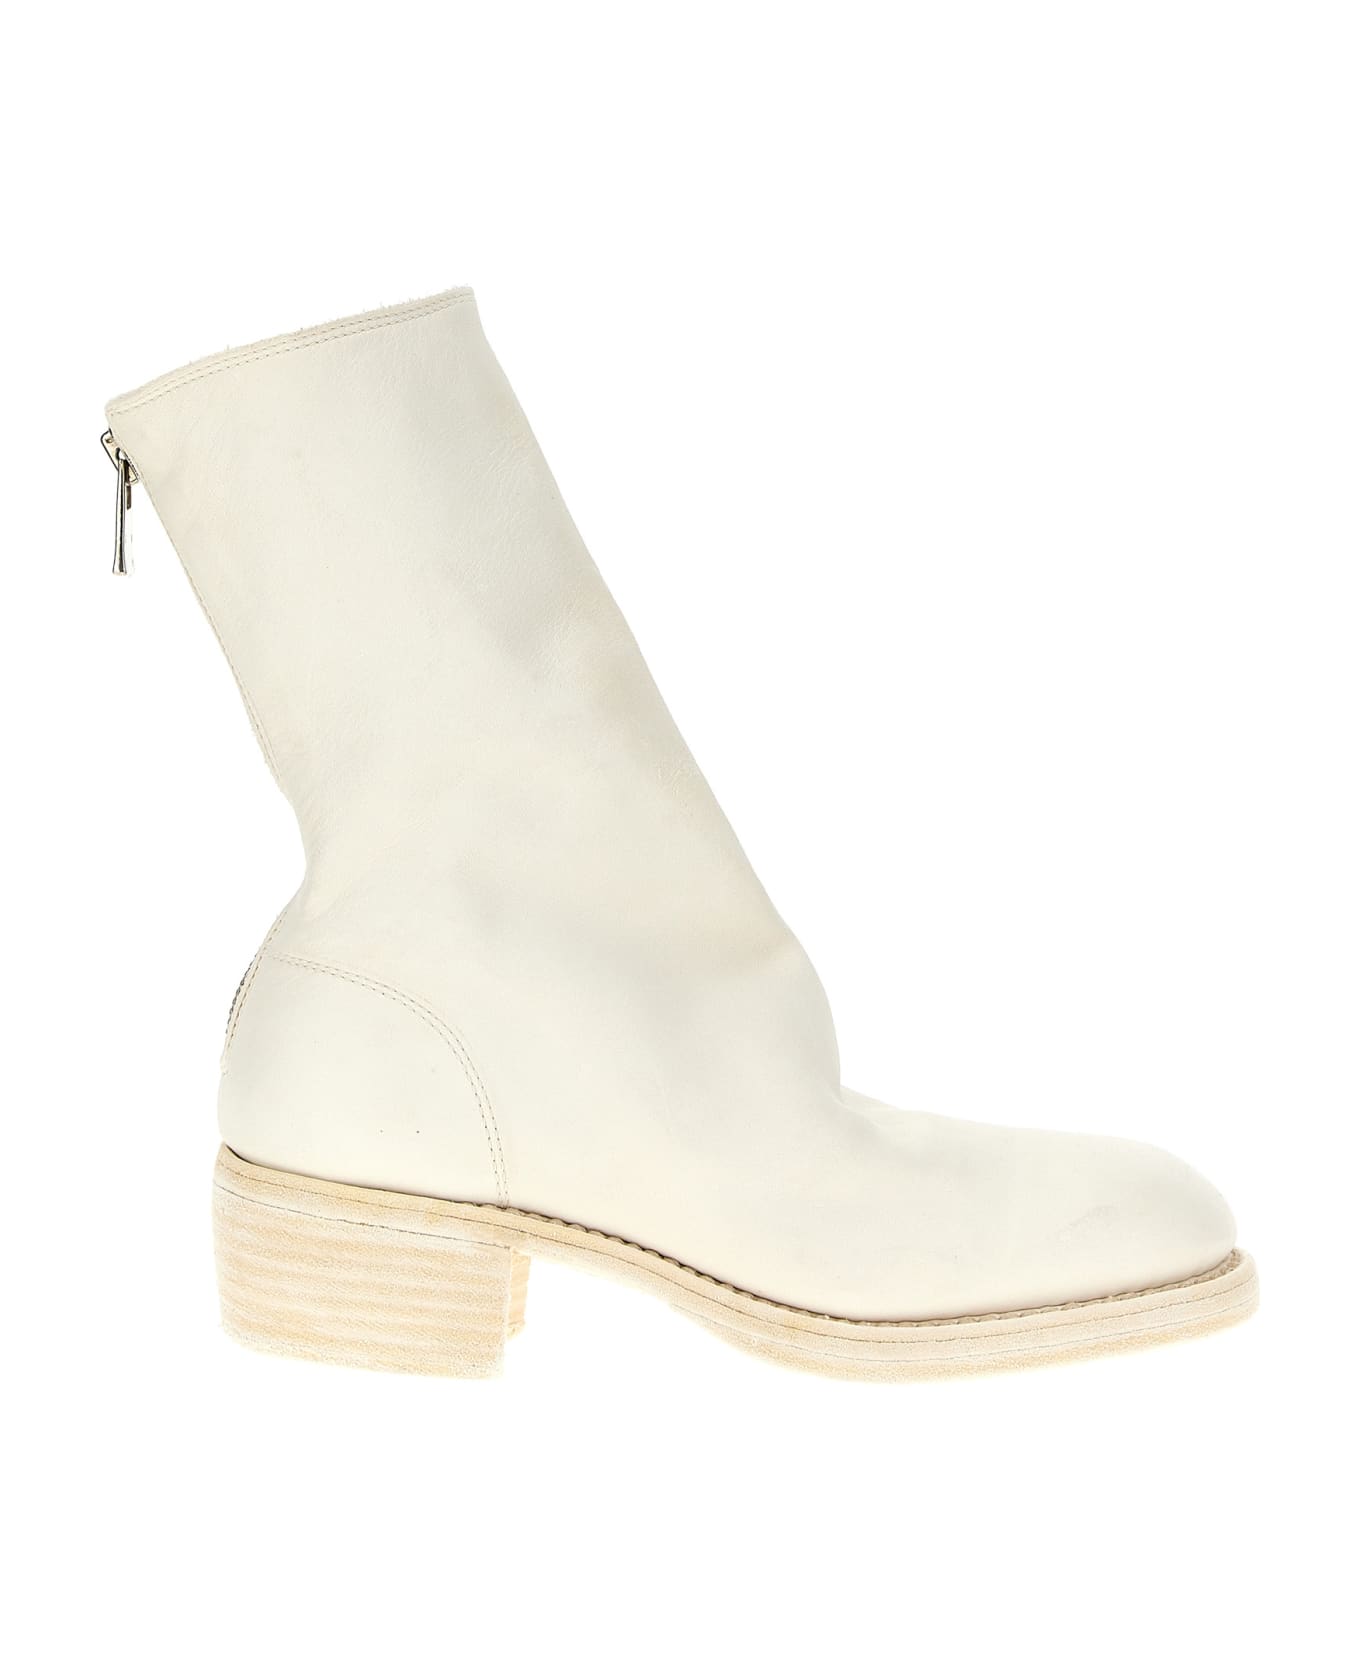 Guidi '788zx' Ankle Boots - White ブーツ